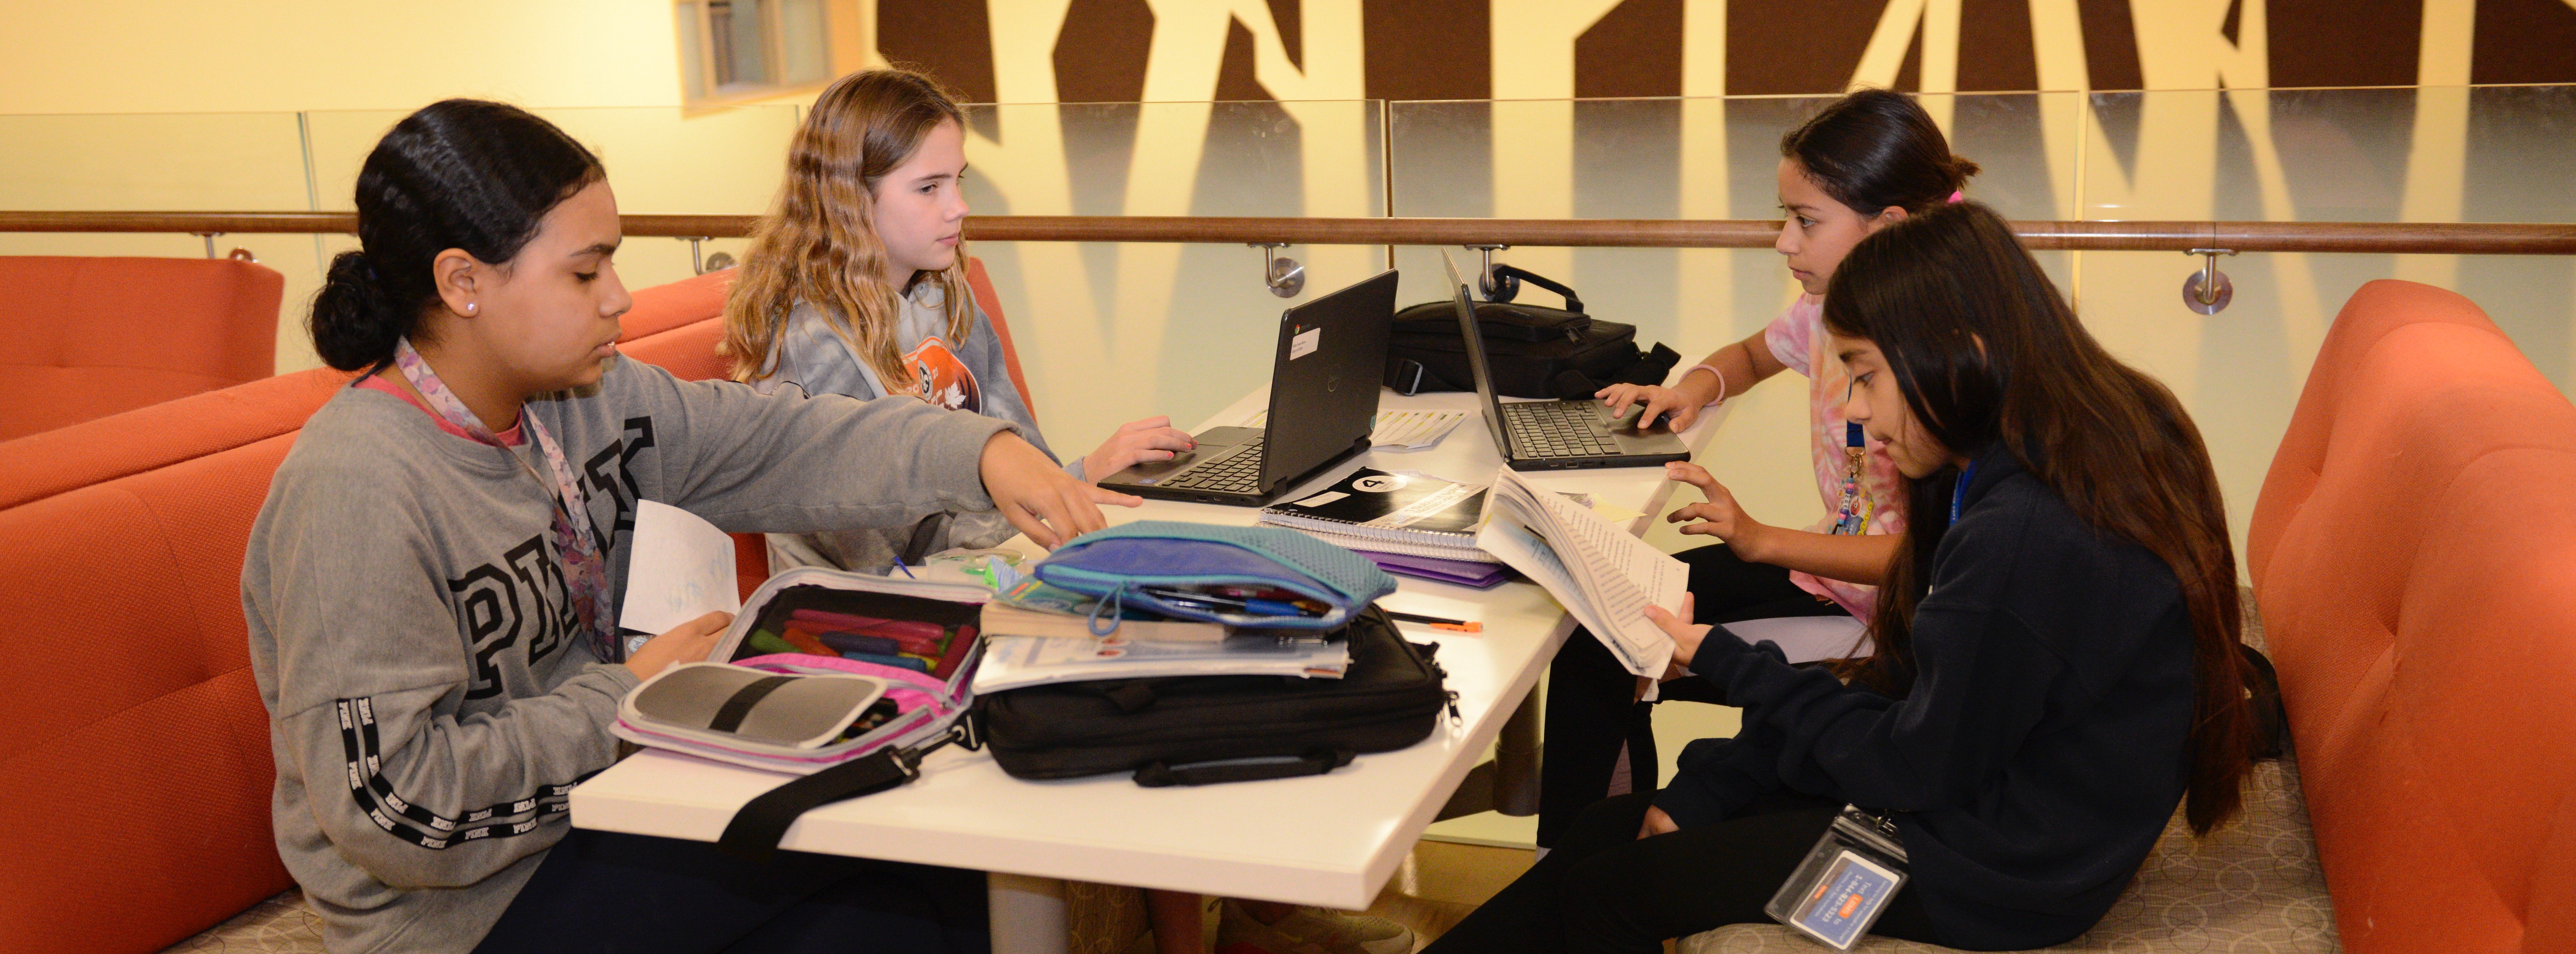 Students working at a table